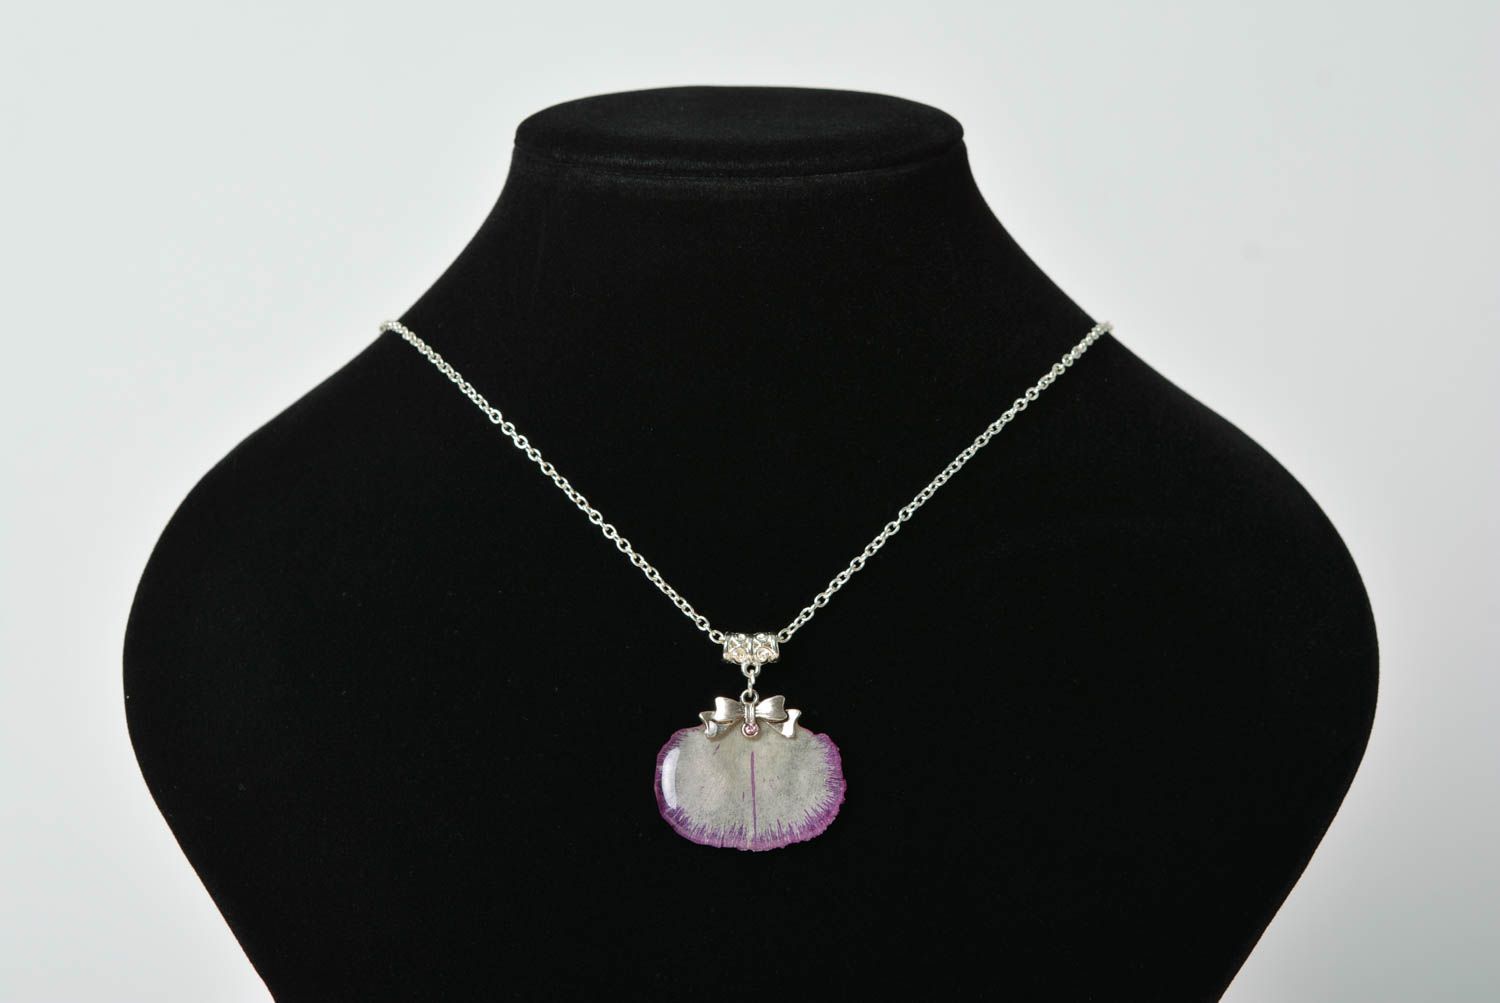 Handmade gentle pendant necklace with dried flowers and epoxy coating on chain photo 2